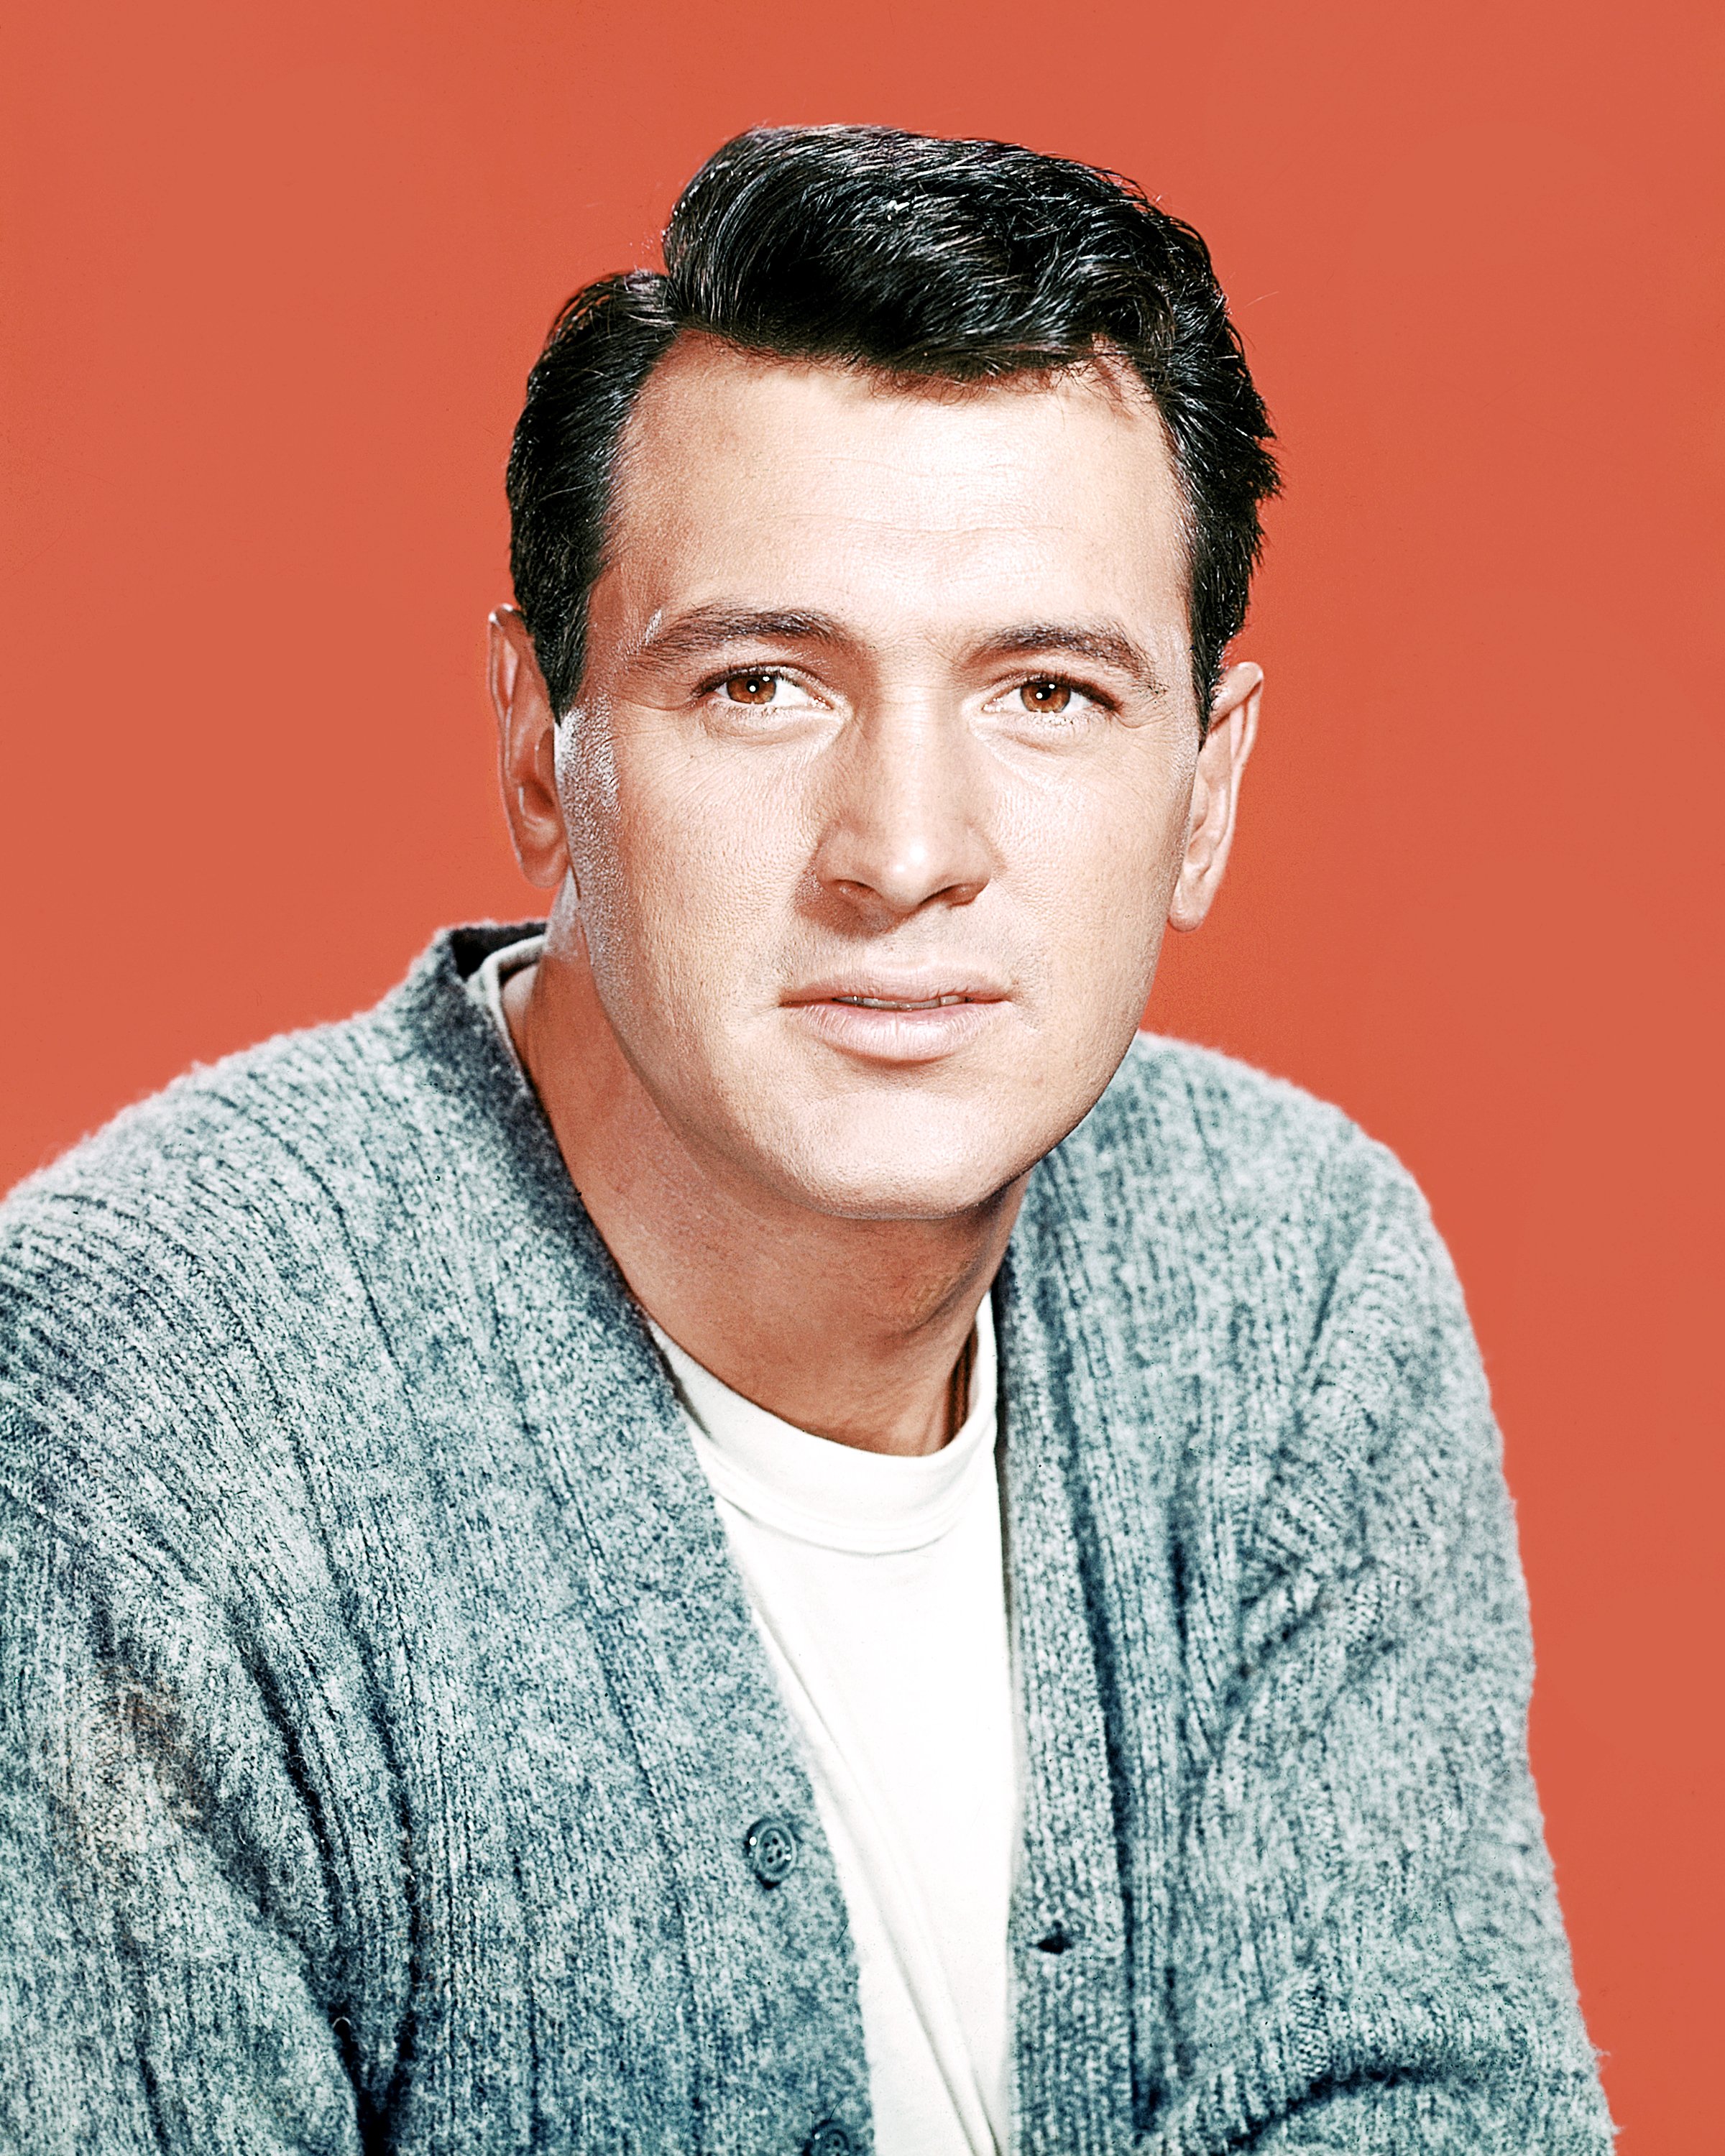 American actor Rock Hudson (1925 - 1985), circa 1955. | Source: Getty Images